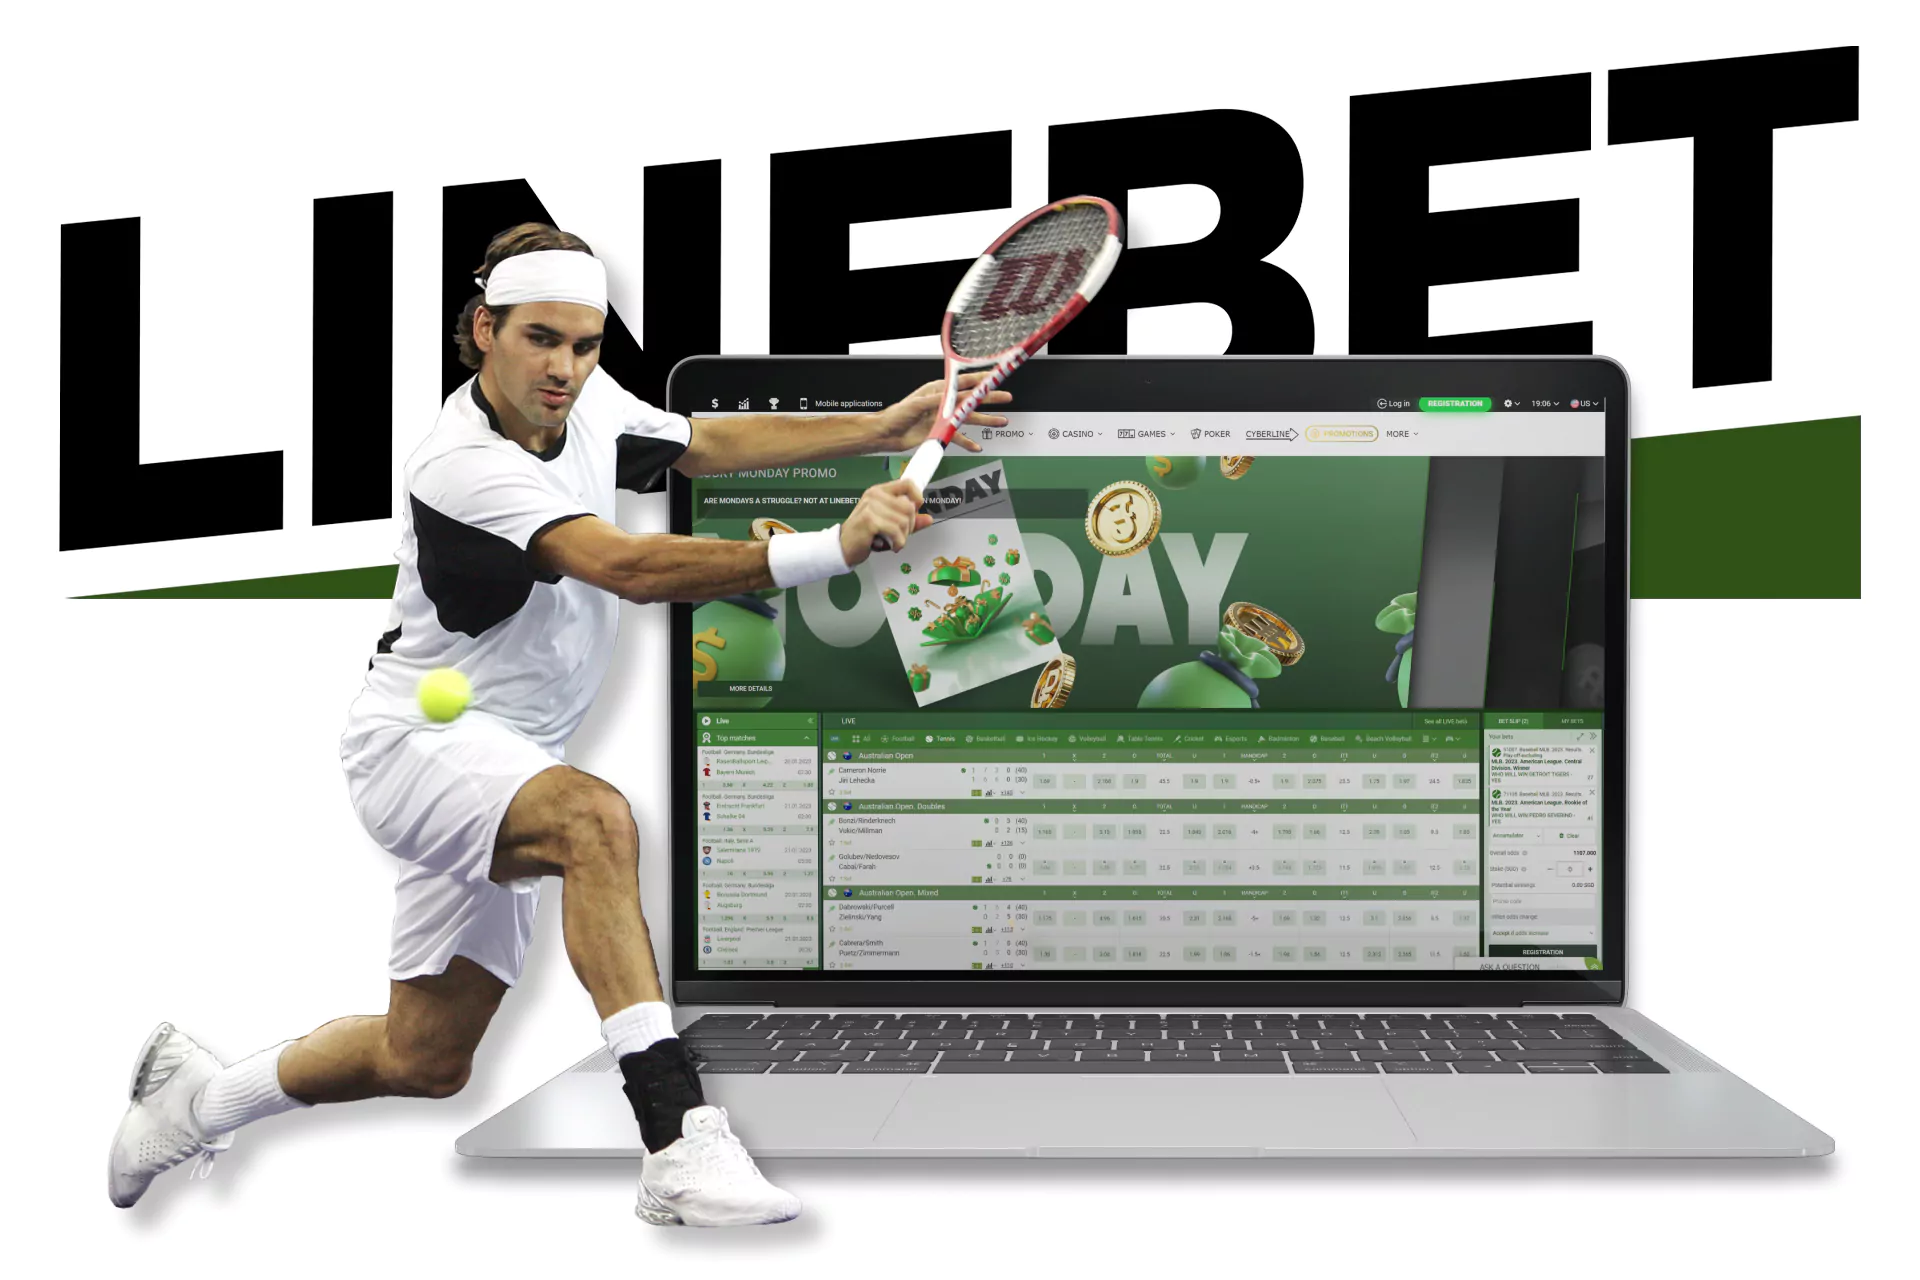 Place bets on tennis tournaments on various markets with Linebet.